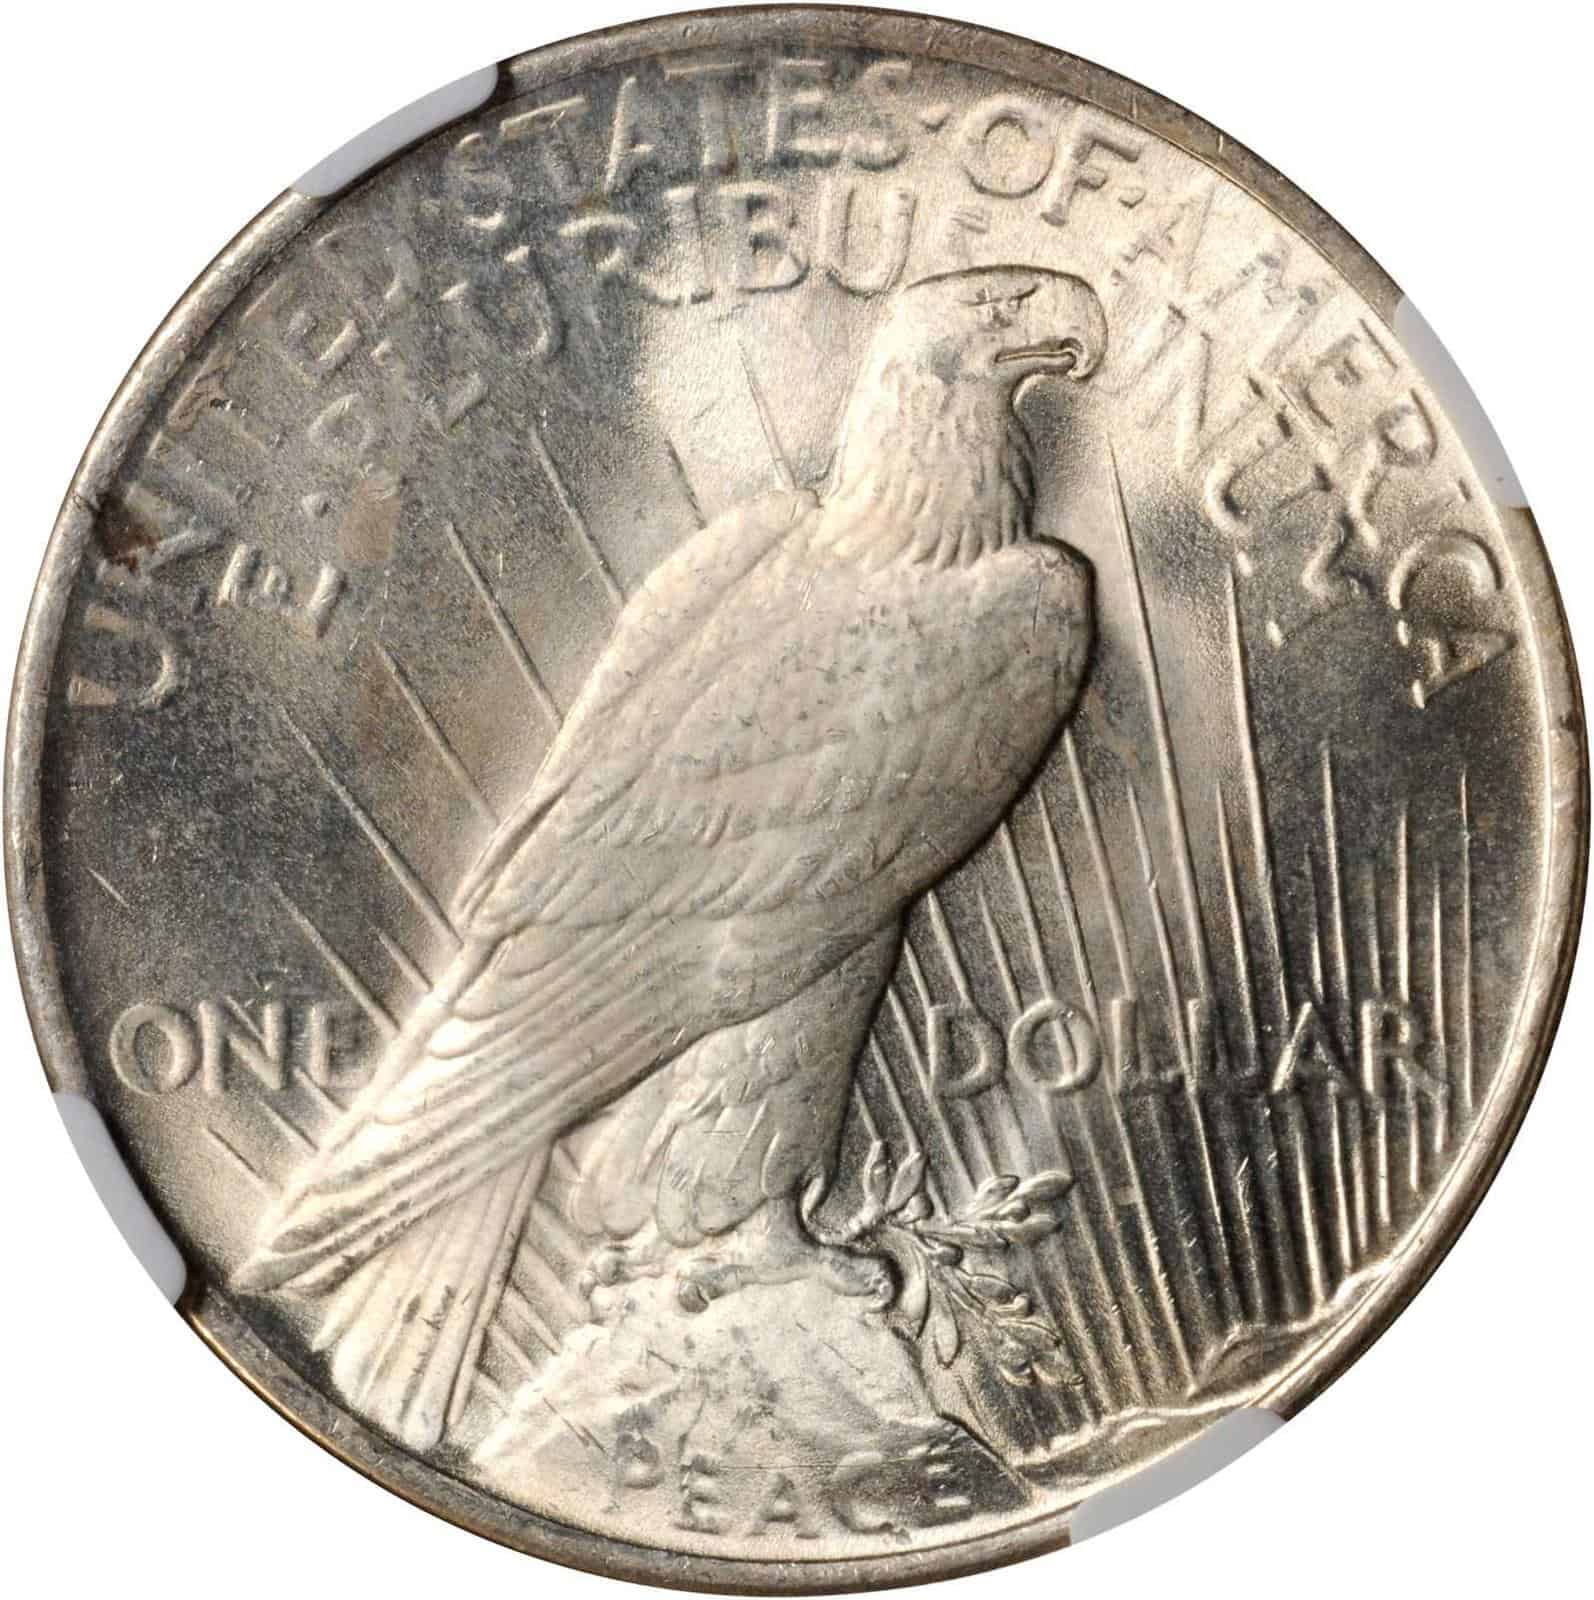 The Reverse of the 1922 Silver Dollar